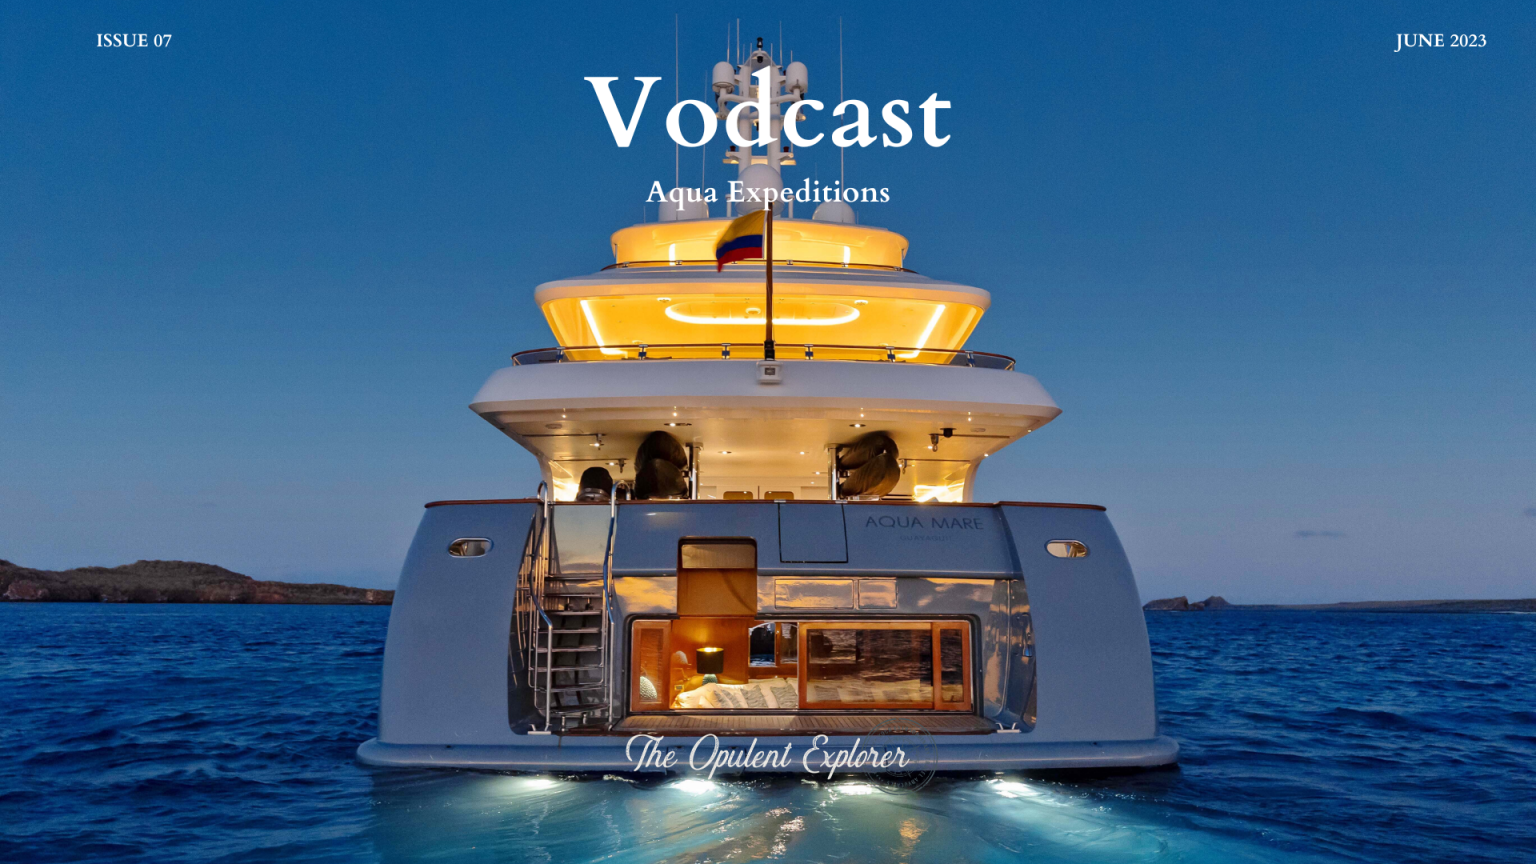 Who we are and where we explore - Aqua expeditions an opulent explore exclusive Vodcast